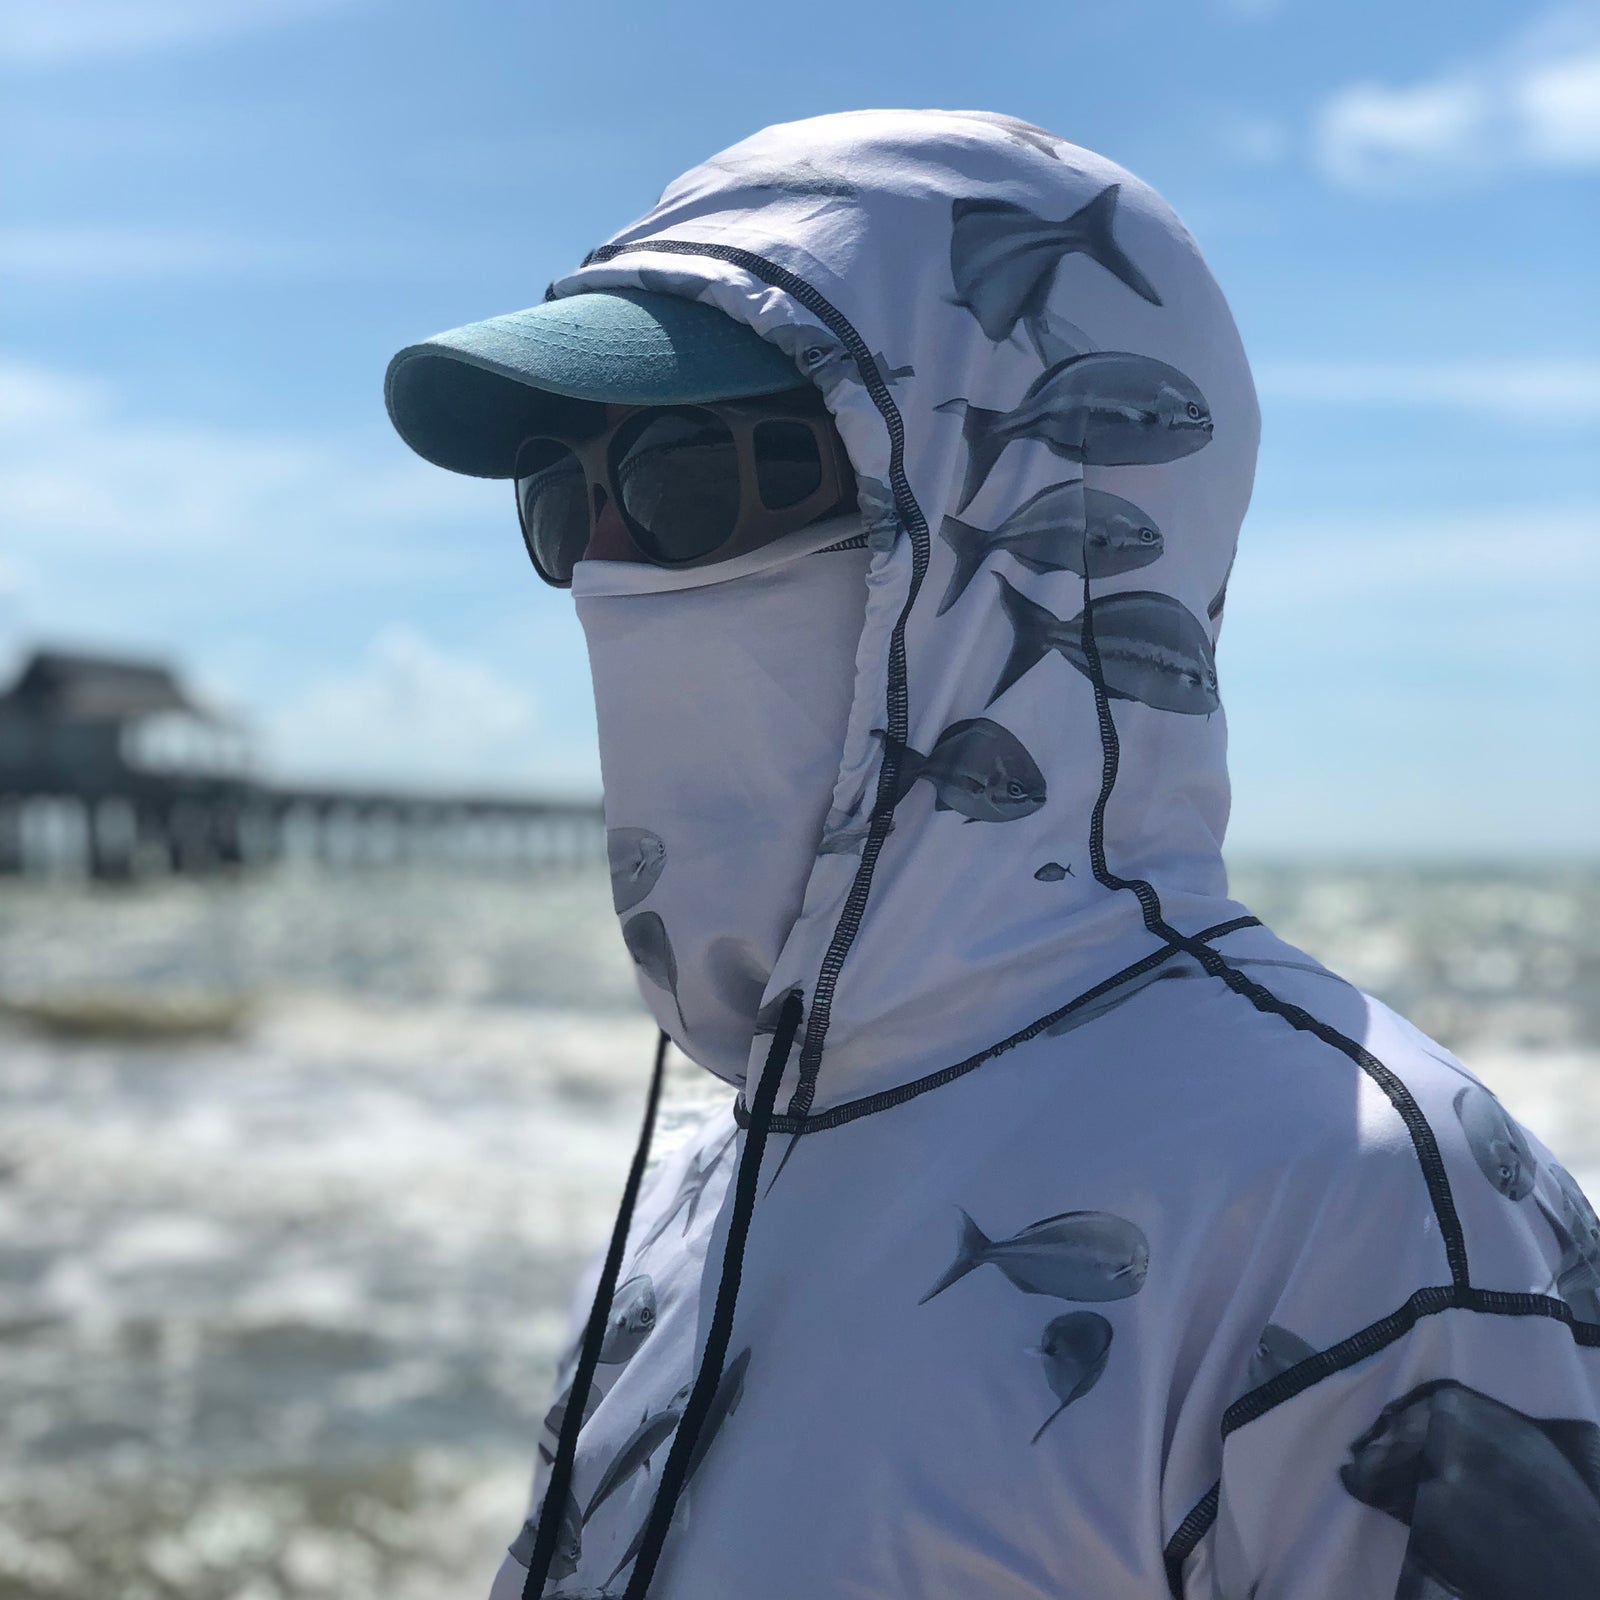 Fly Fishing Apparel and Accessories Outdoor Graphic Clothing Surf Dive